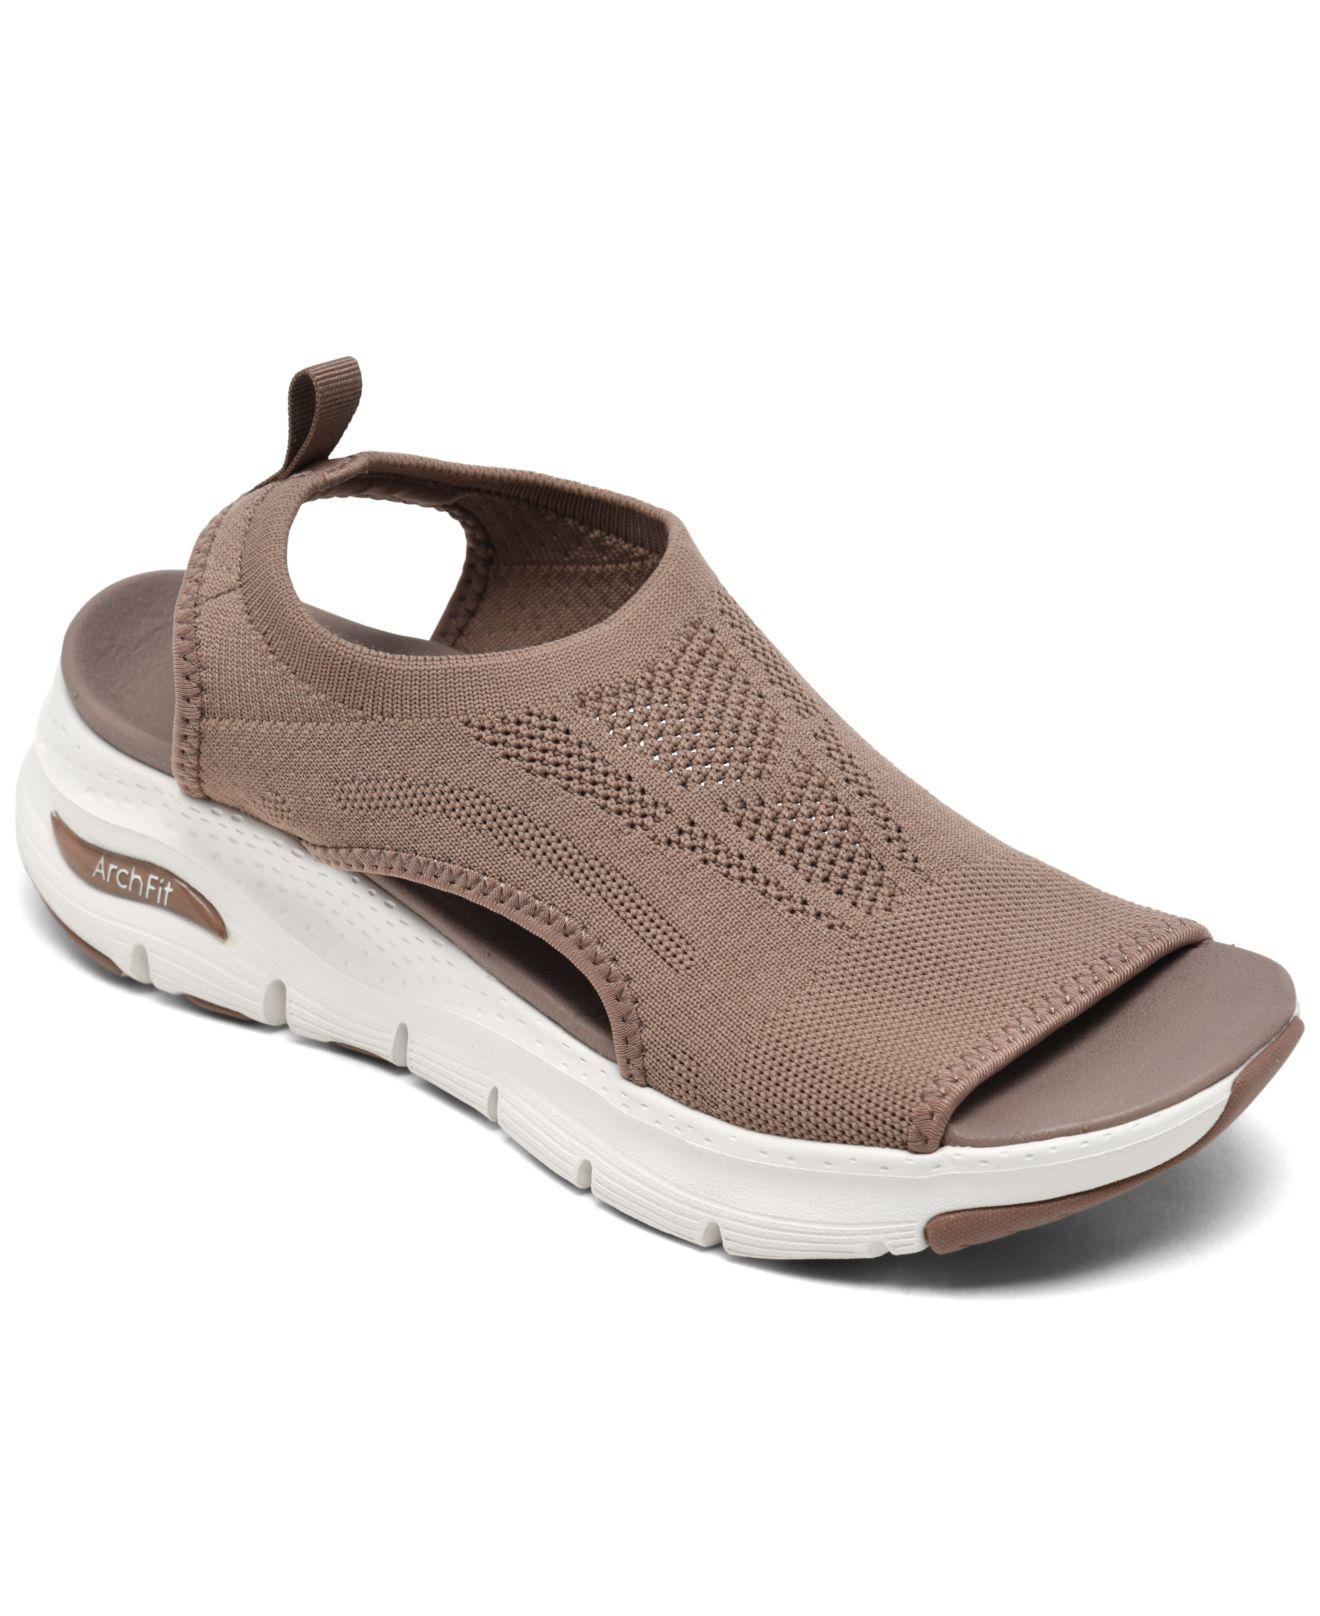 Skechers Arch Fit Arch Support - City Catch Walking Sandals From Finish ...